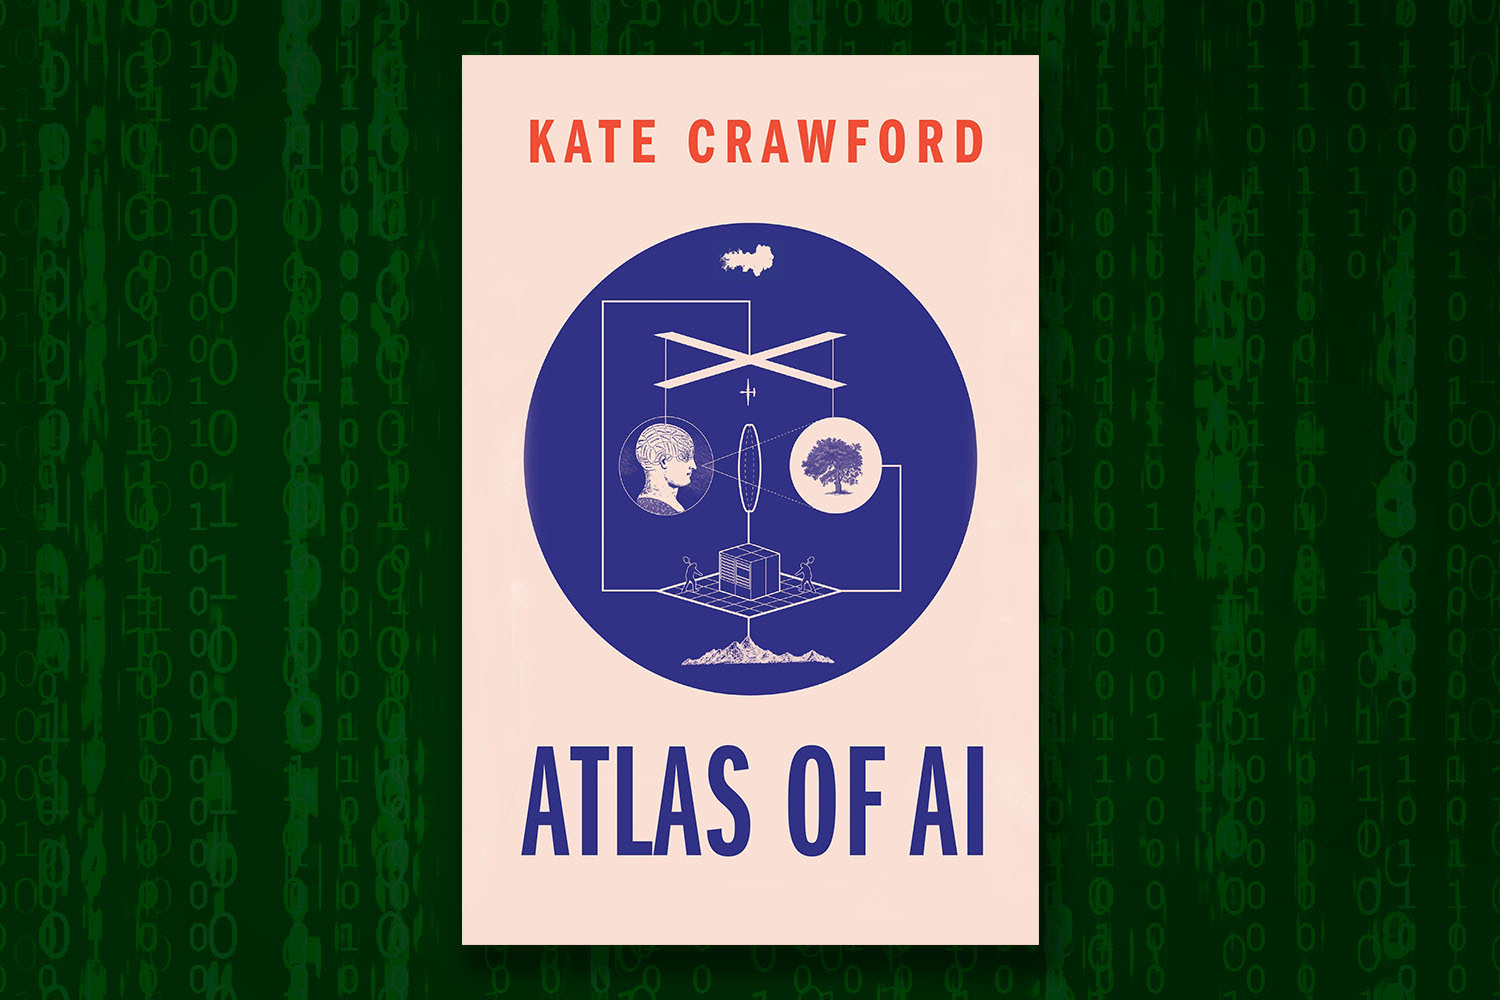 Atlas of AI Book on background